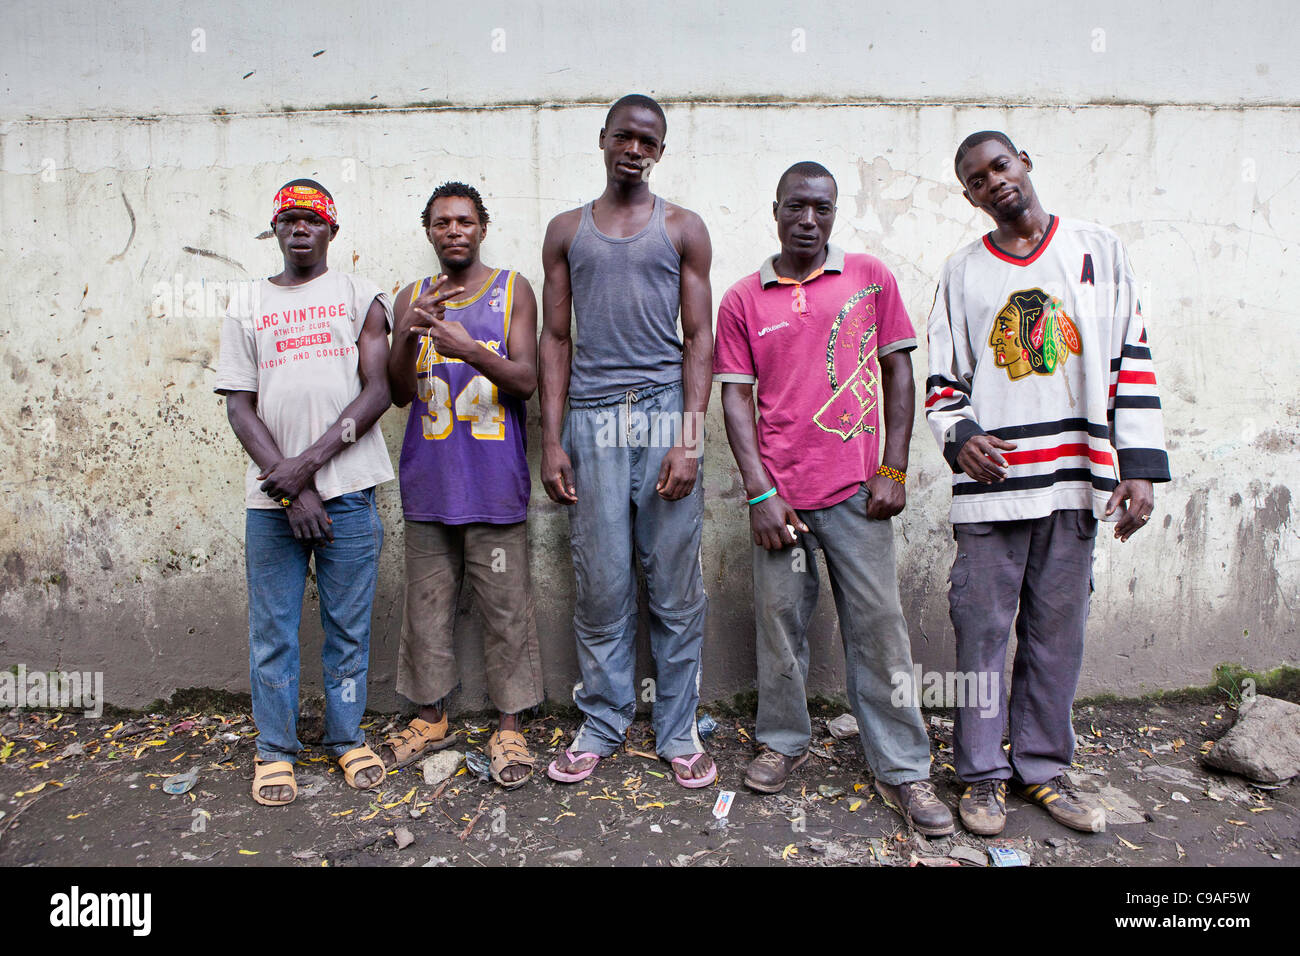 Gang leaders in central Mombasa, Kenya. They are the largest gang of street children in the city. Stock Photo